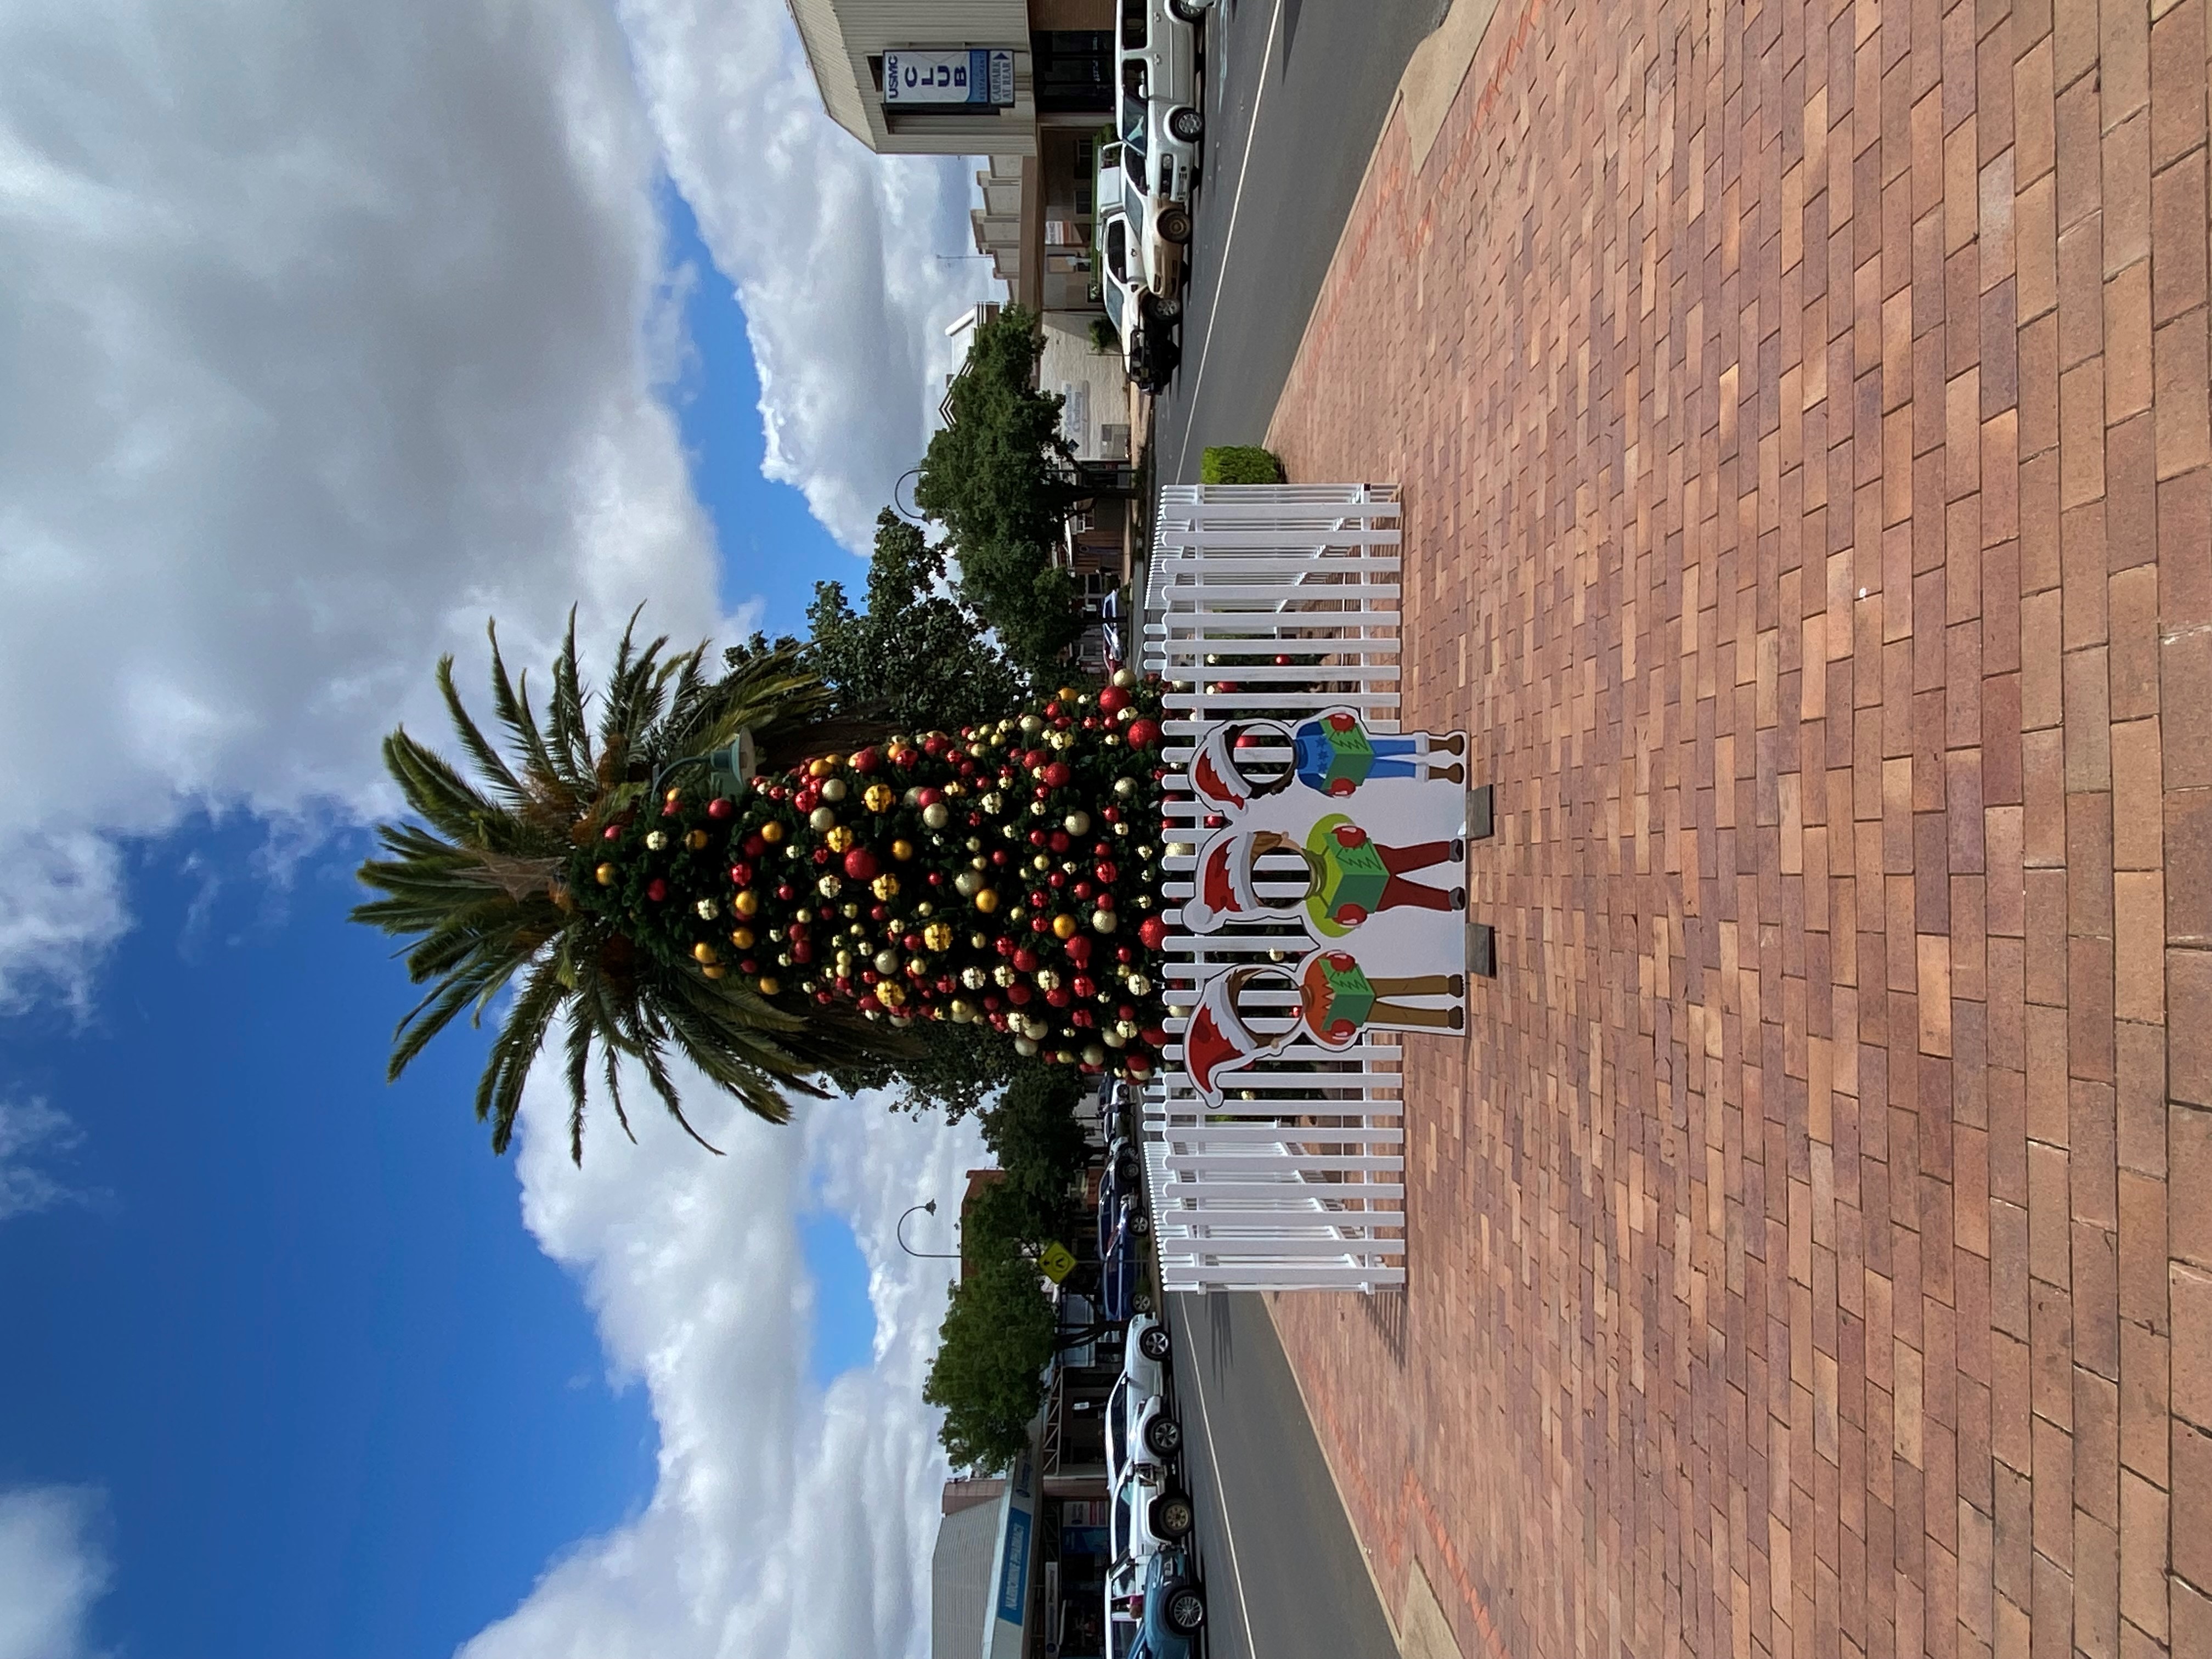 Media Release - Christmas is all around us and so the feeling grows